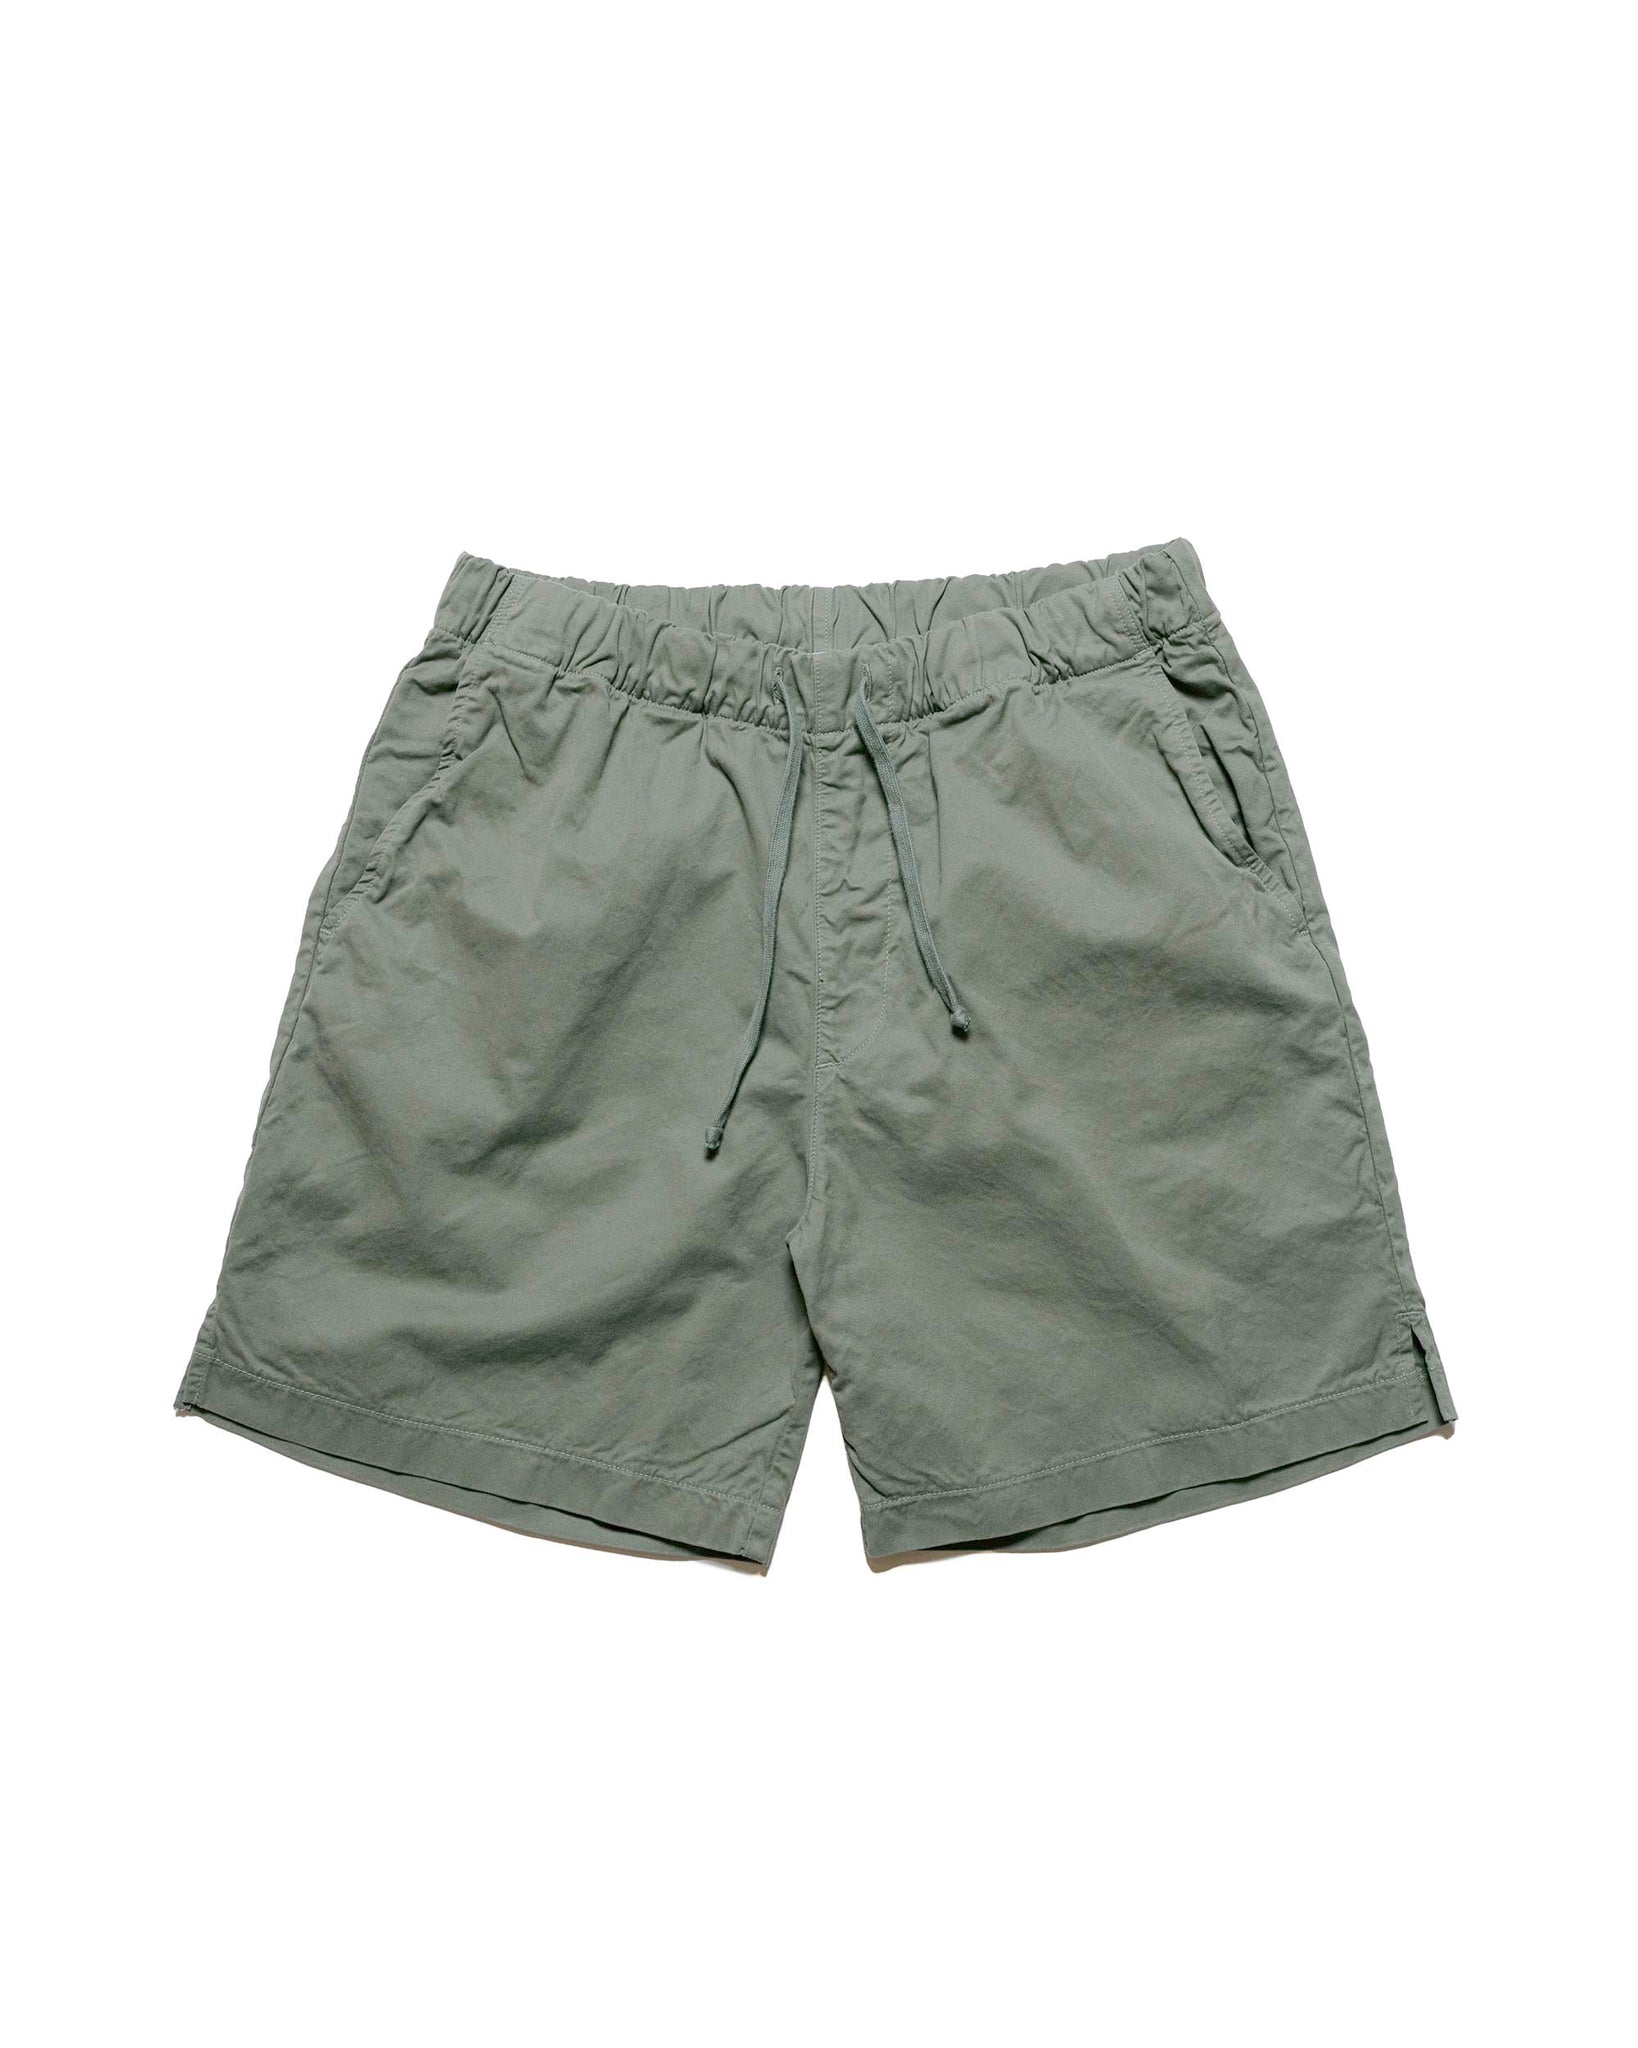 Save Khaki United Twill Easy Short Sprout